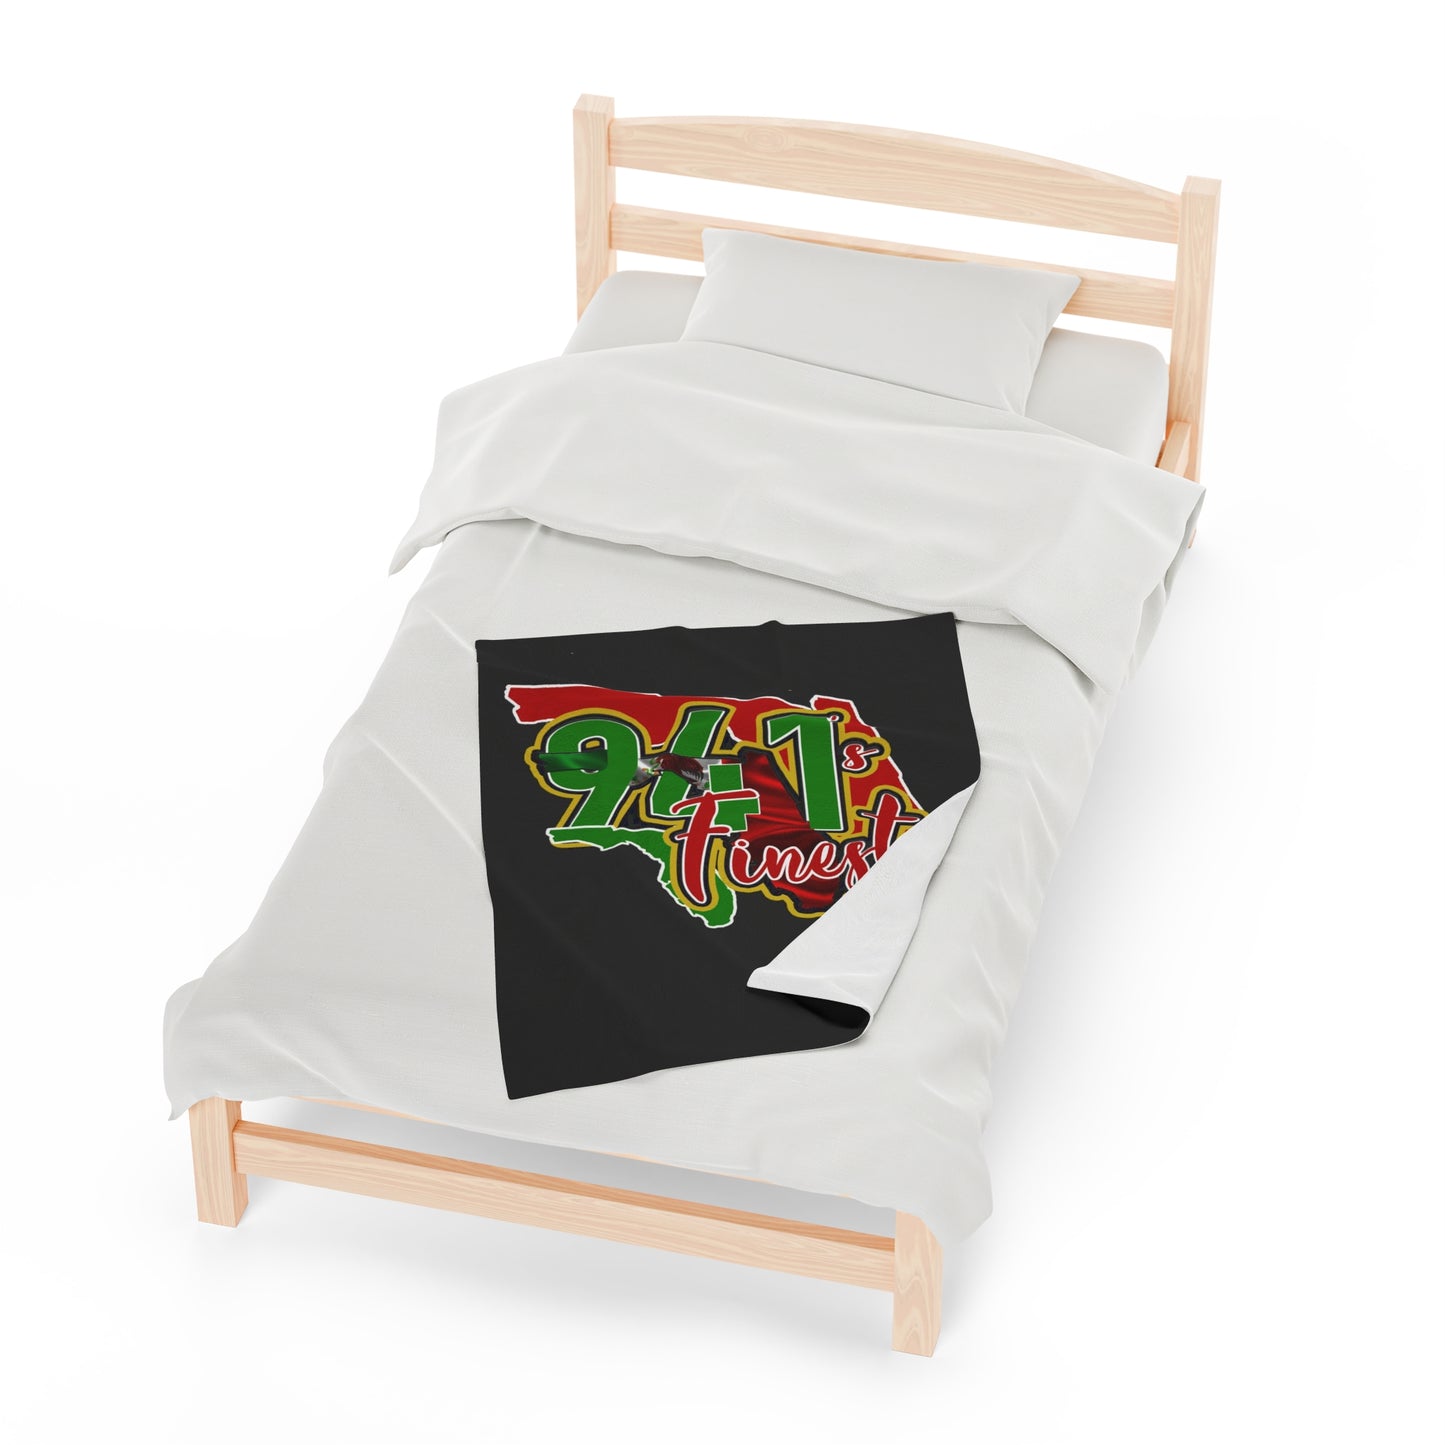 941’s finest Plush Blanket (Mexican Flag)